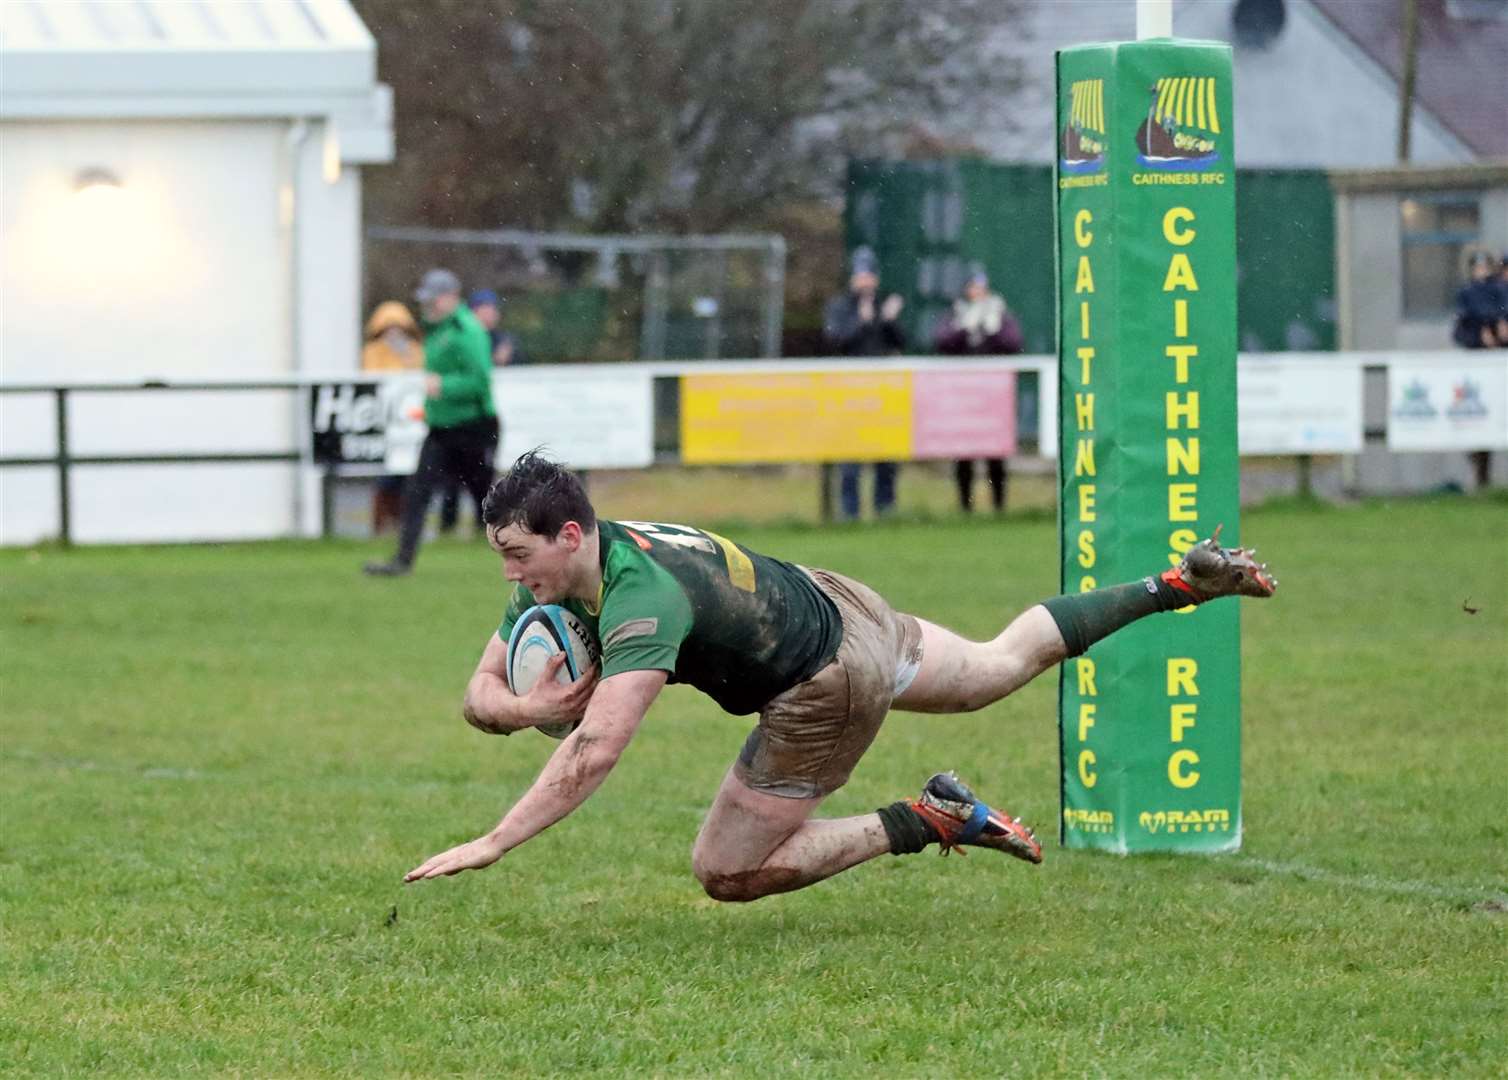 Jordan Miller flies over the try line to score for Caithness in last month's 34-7 win against Carrick at Millbank, a result that lifted the Greens out of the relegation zone. Picture: James Gunn